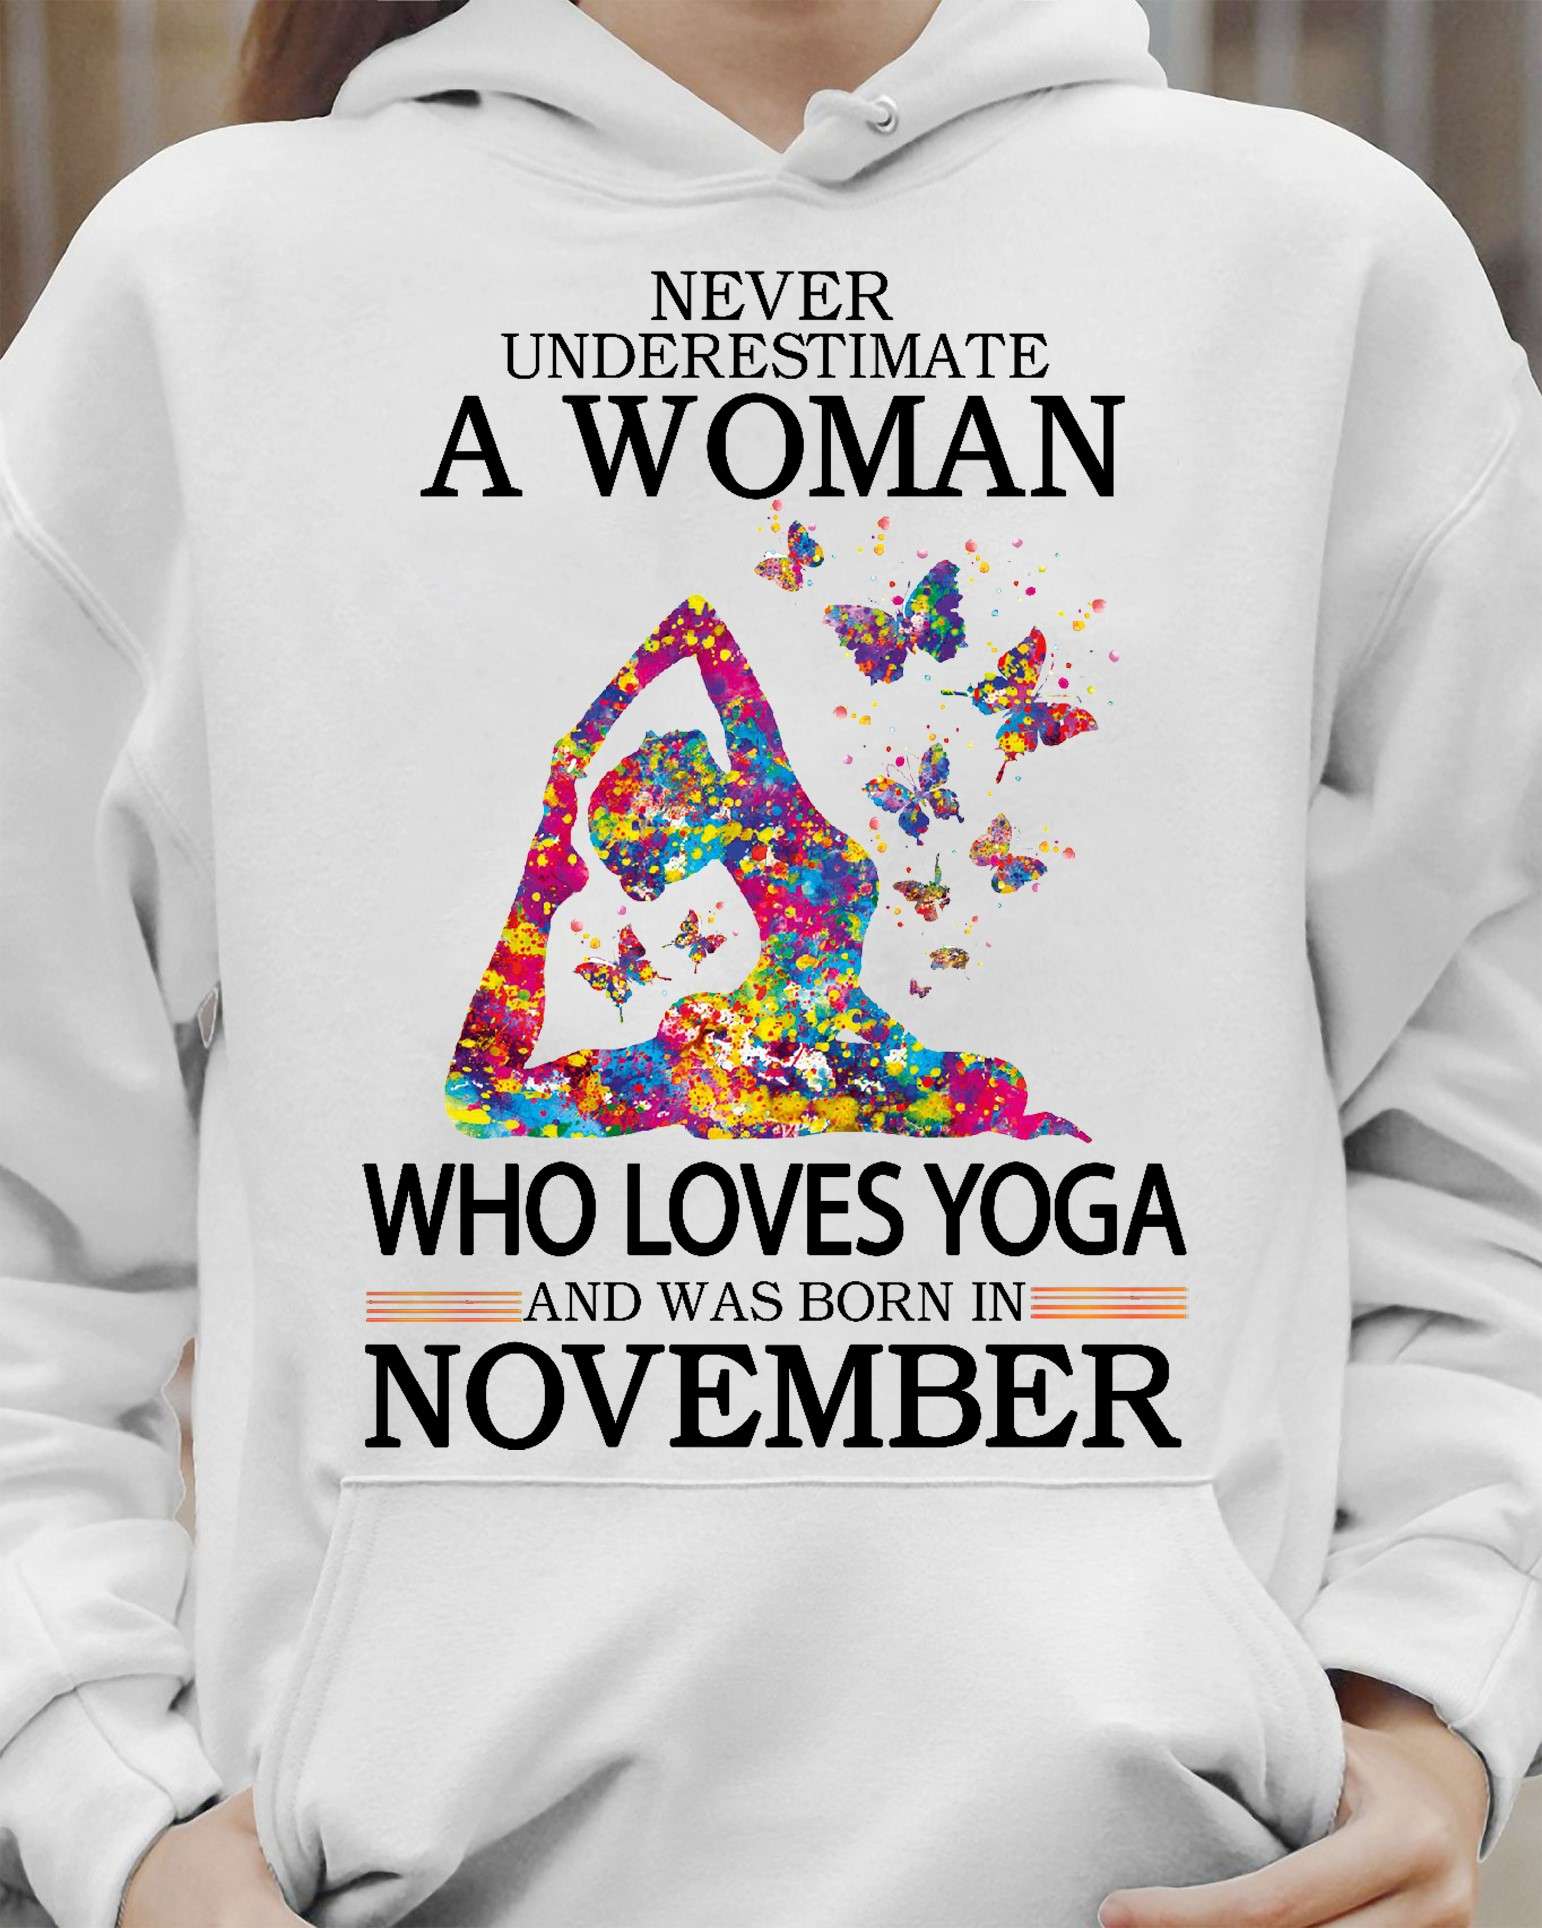 Never underestimate a woman who loves yoga and was born in November